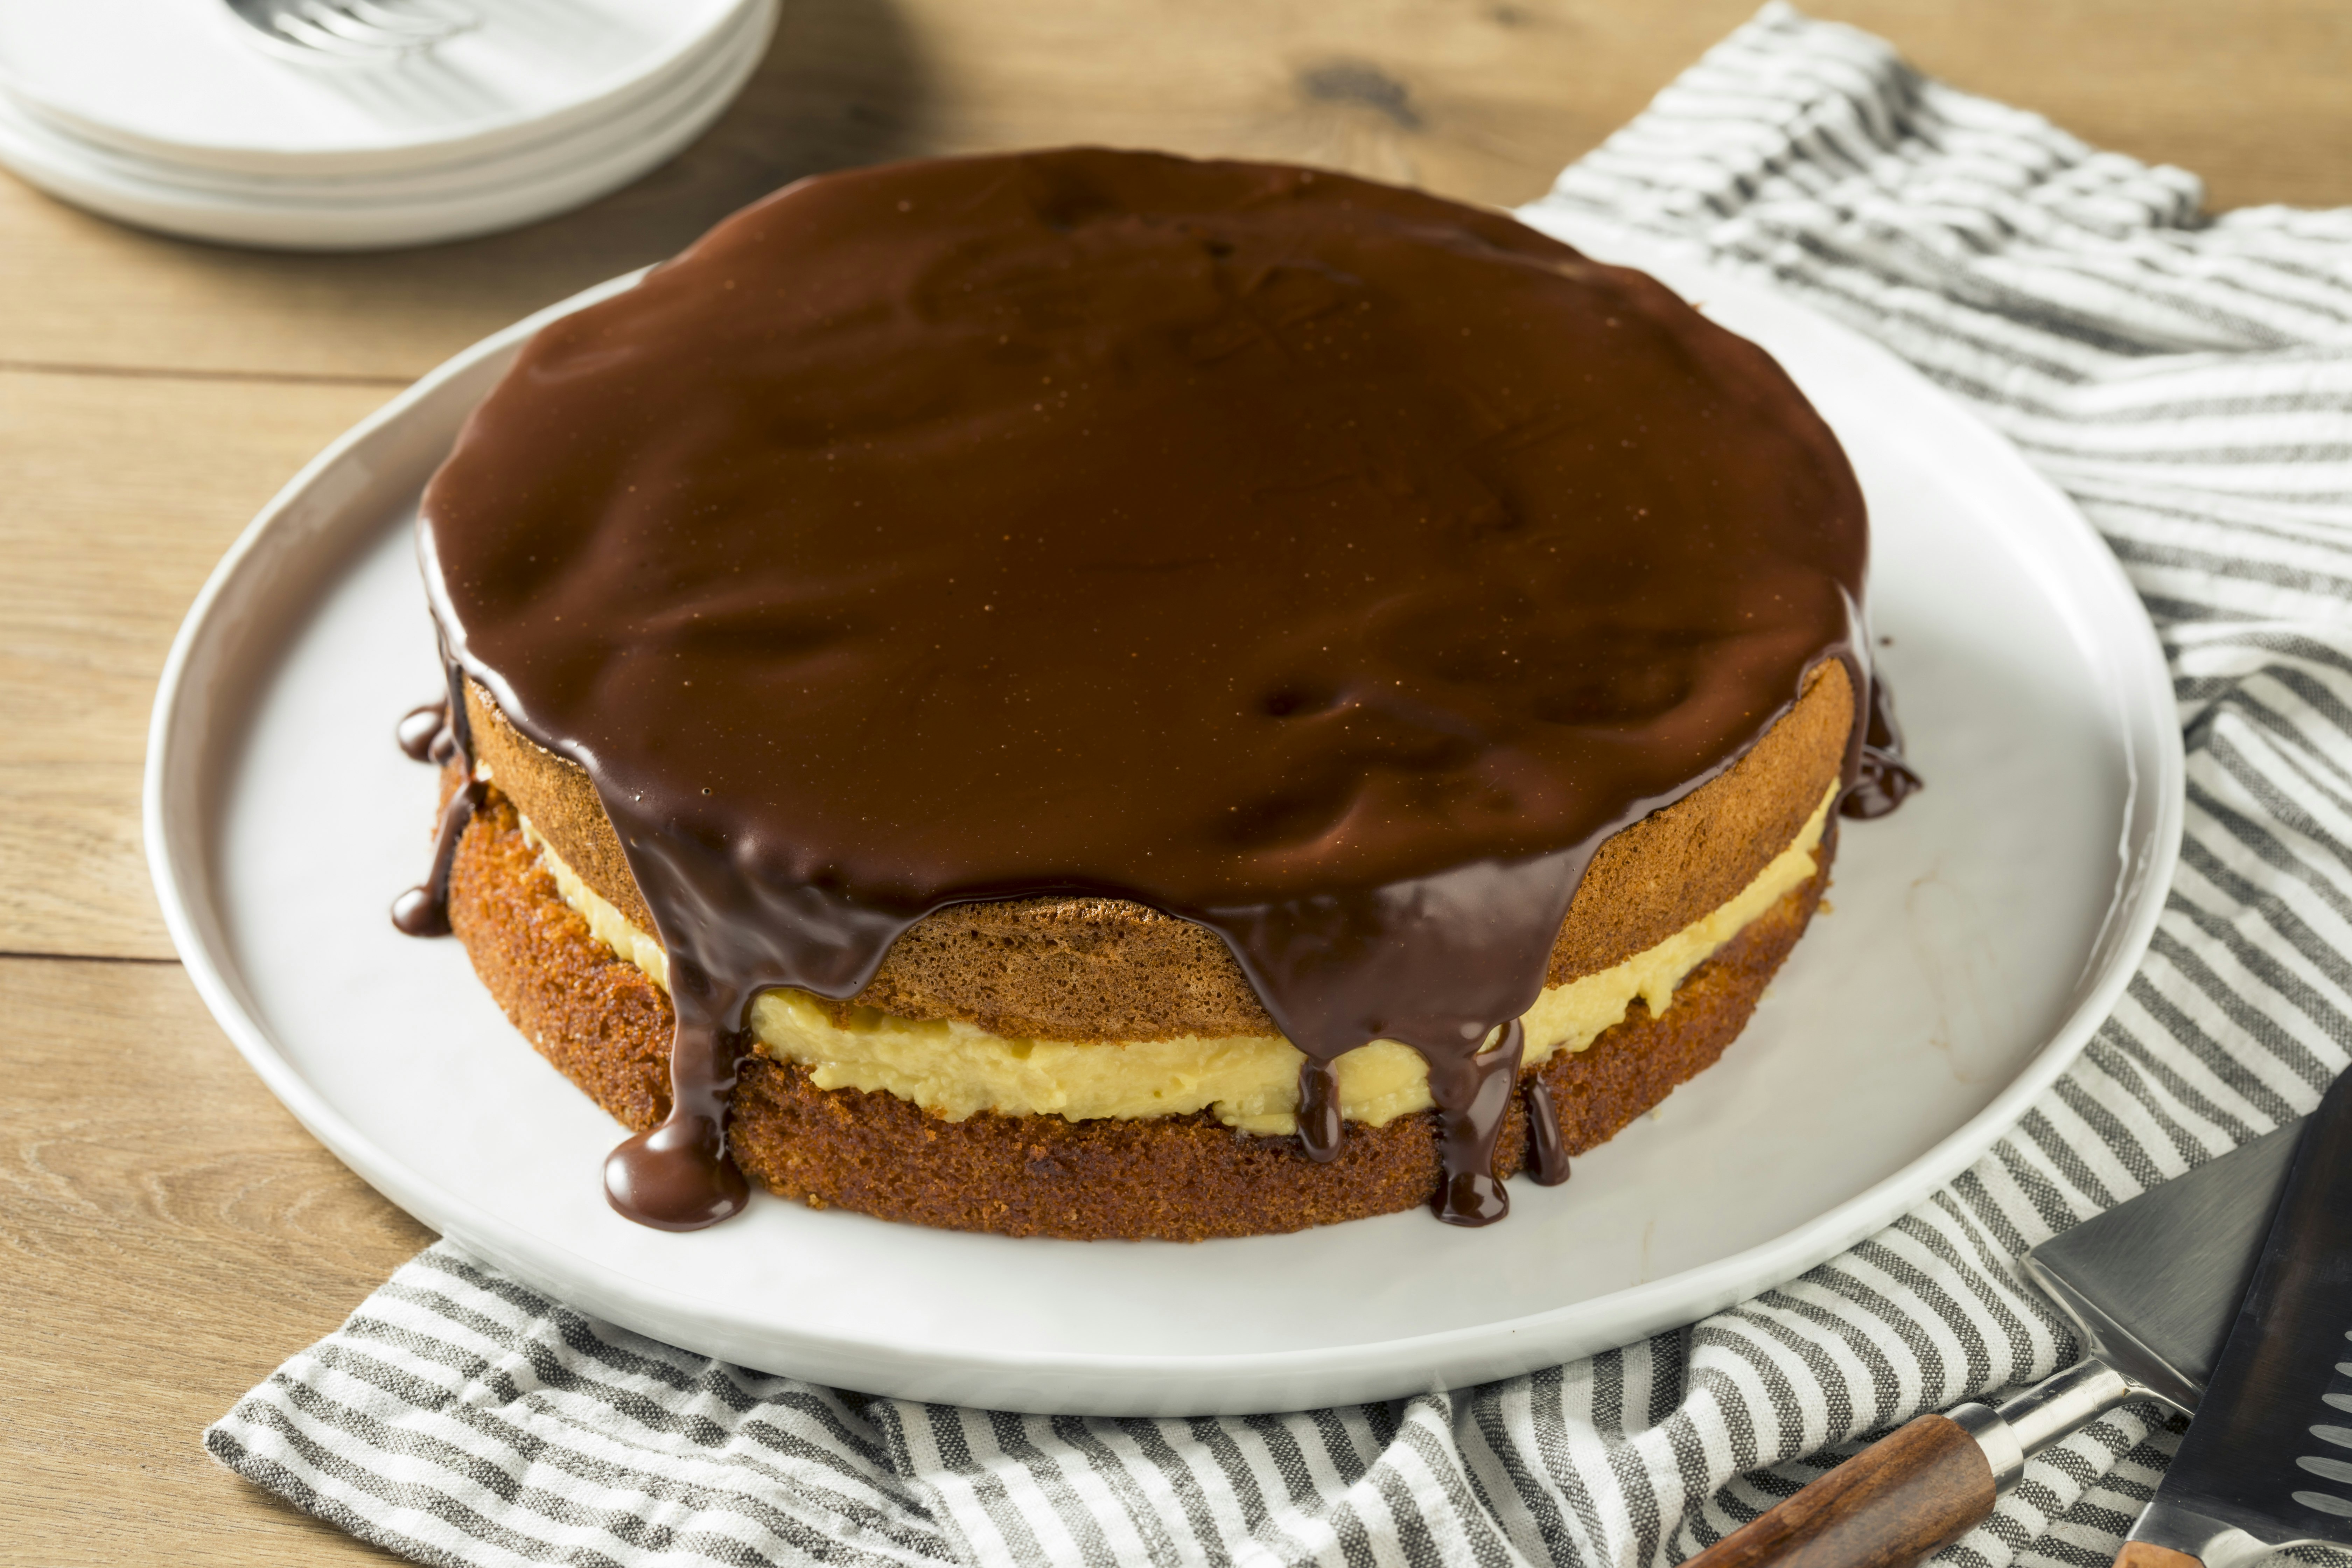 Chocolate ganache covers the top of a sponge cake that's filled with a light-colored cream